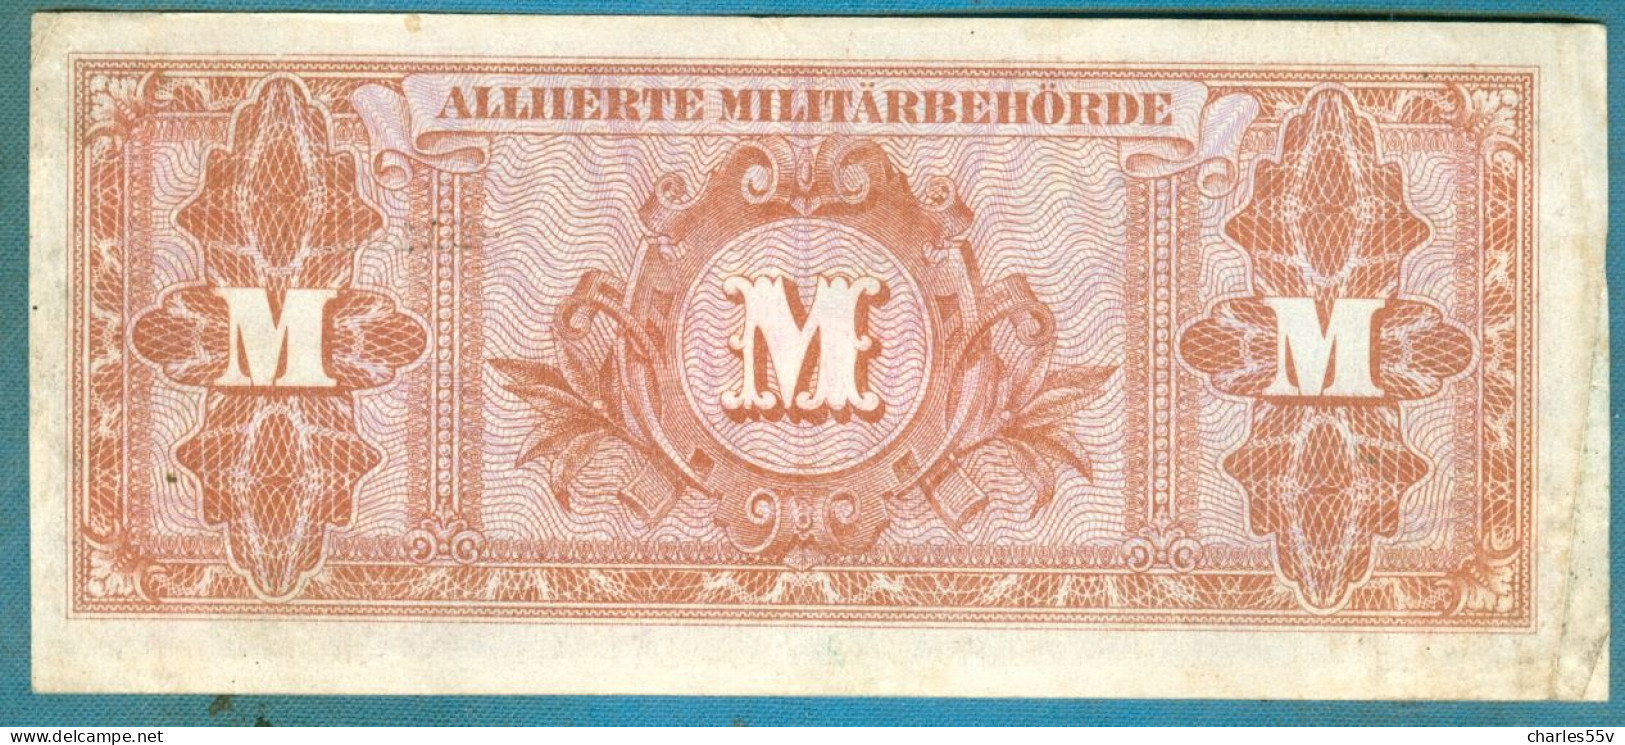 100 Mark 1944  Russian Printing (replacement) - 100 Mark